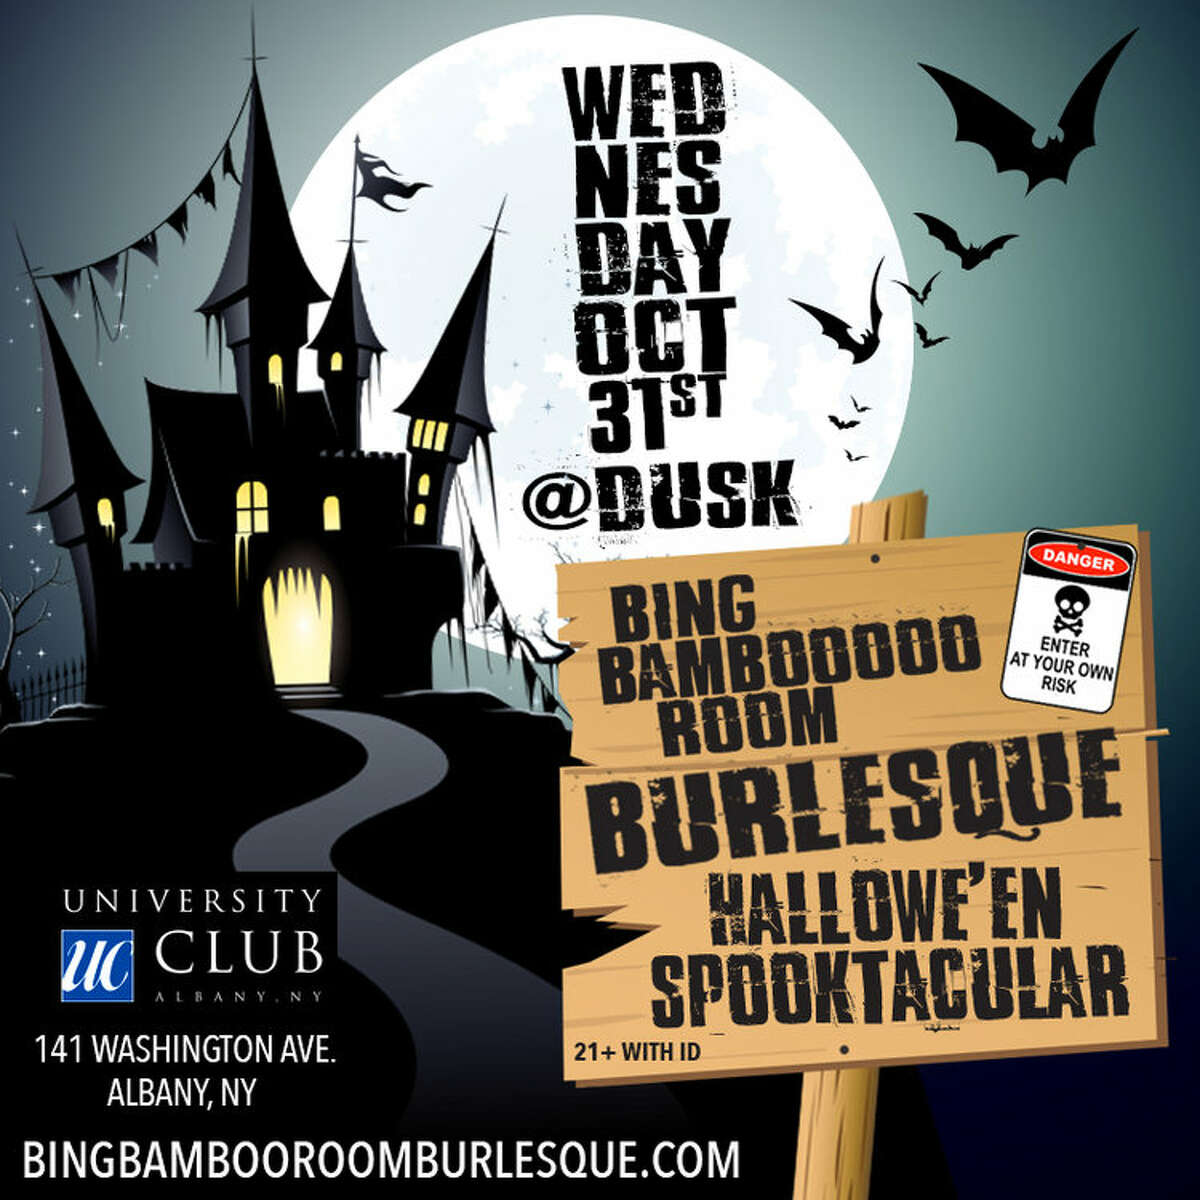 Bing Bambooooo Room Hallowe'en Spooktacular Burlesque Show When: Wednesday, Oct. 31. What: A dress-up, dress-down Halloween-night blow-out, complete with "groovy ghoulie burlesque" and costume contest. Where: The University Club, 141 Washington Ave, Albany. Get the details. 